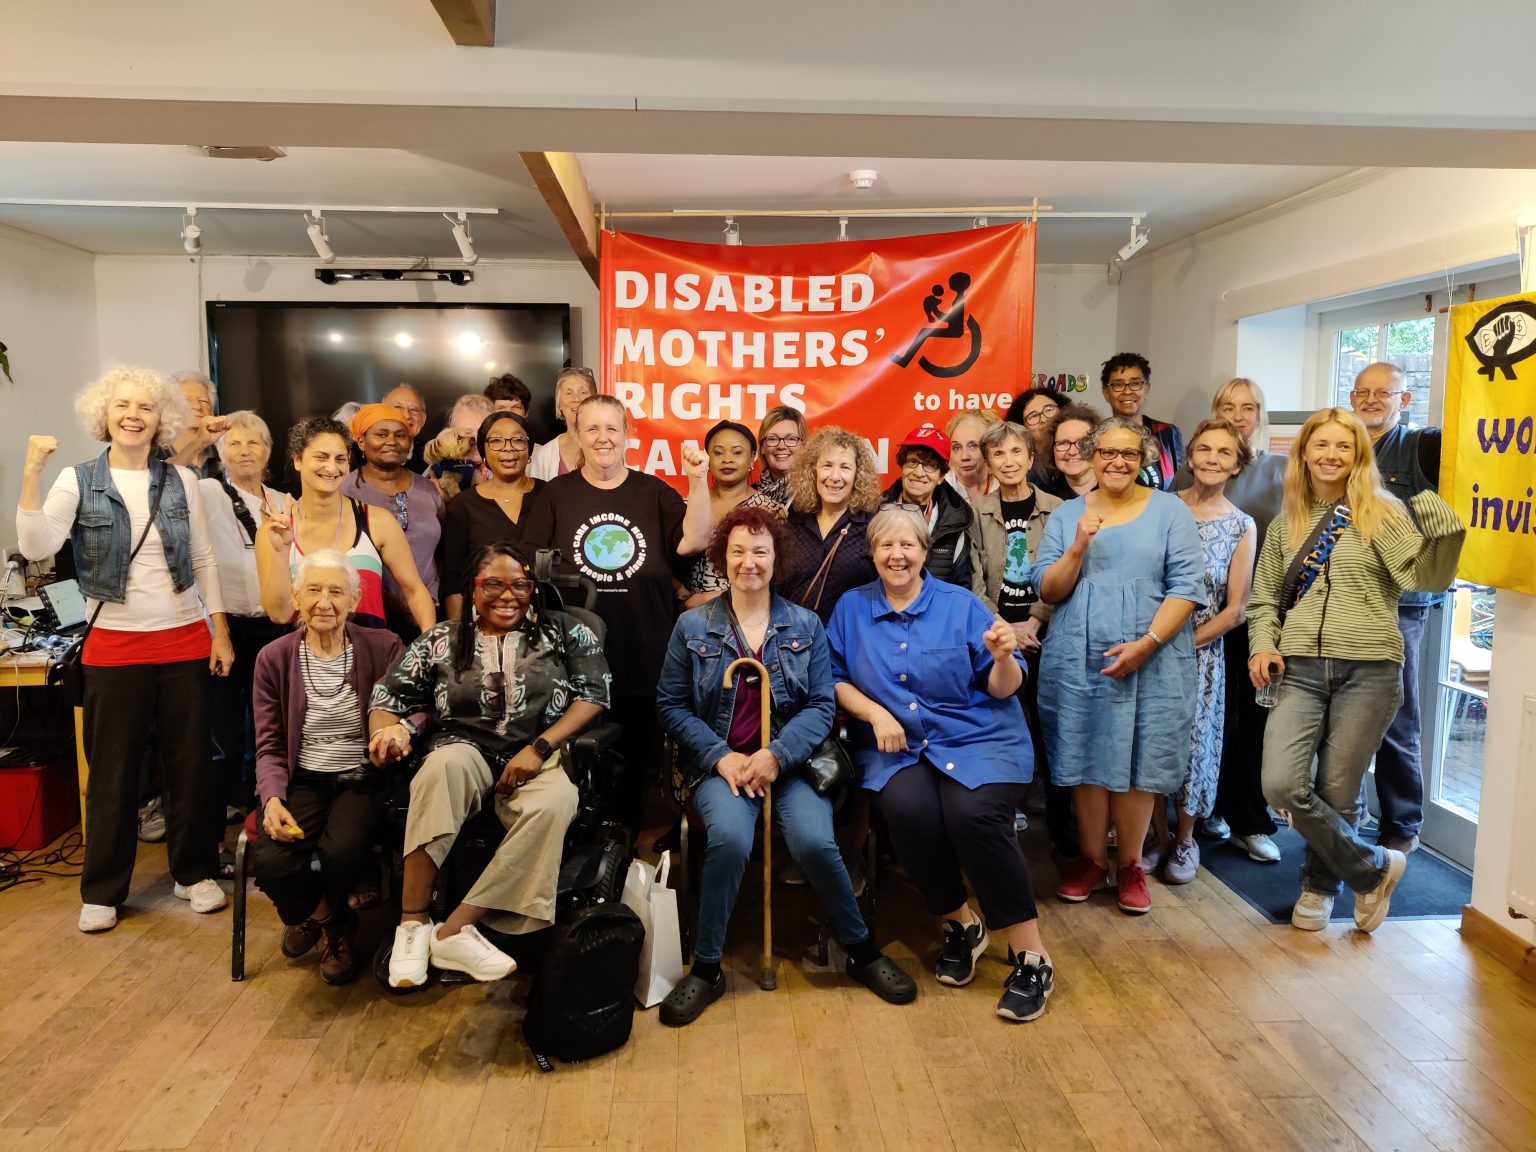 A diverse array of people, mainly women, in a meeting hall, some seated at the front, are smiling and some are making the power salute, in front of the Disabled Mothers' Rights Campaign banner.